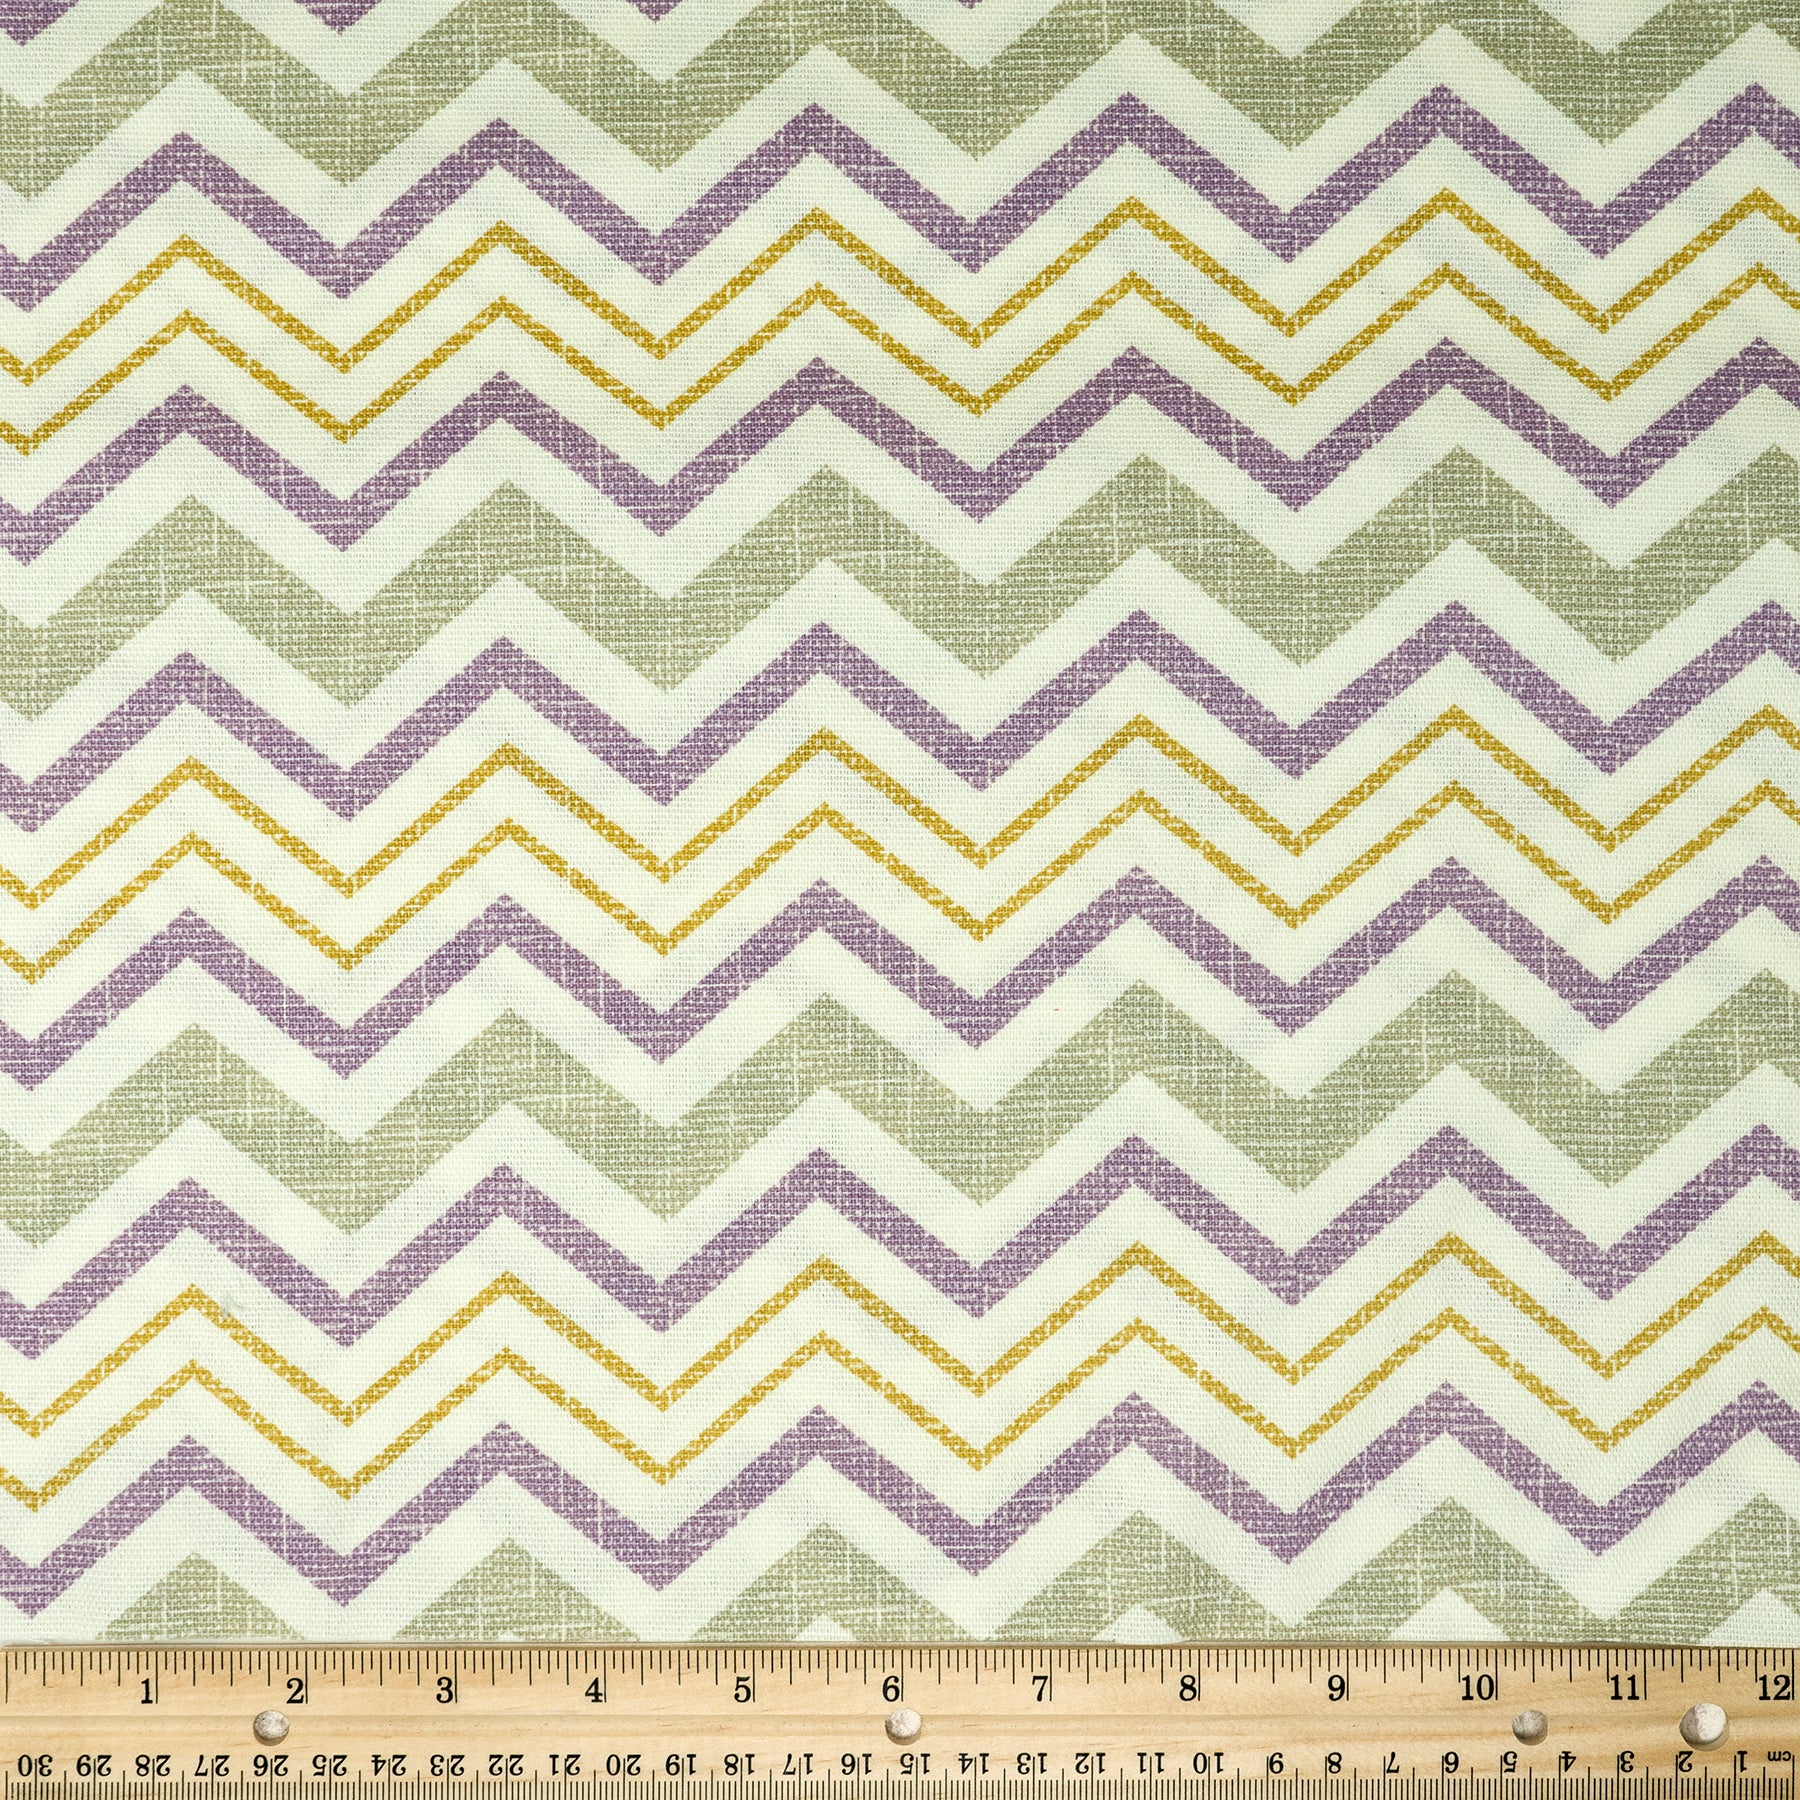 Waverly Inspirations 100% Cotton Duck 45" Width Chevron Lilac Color Sewing Fabric by the Yard